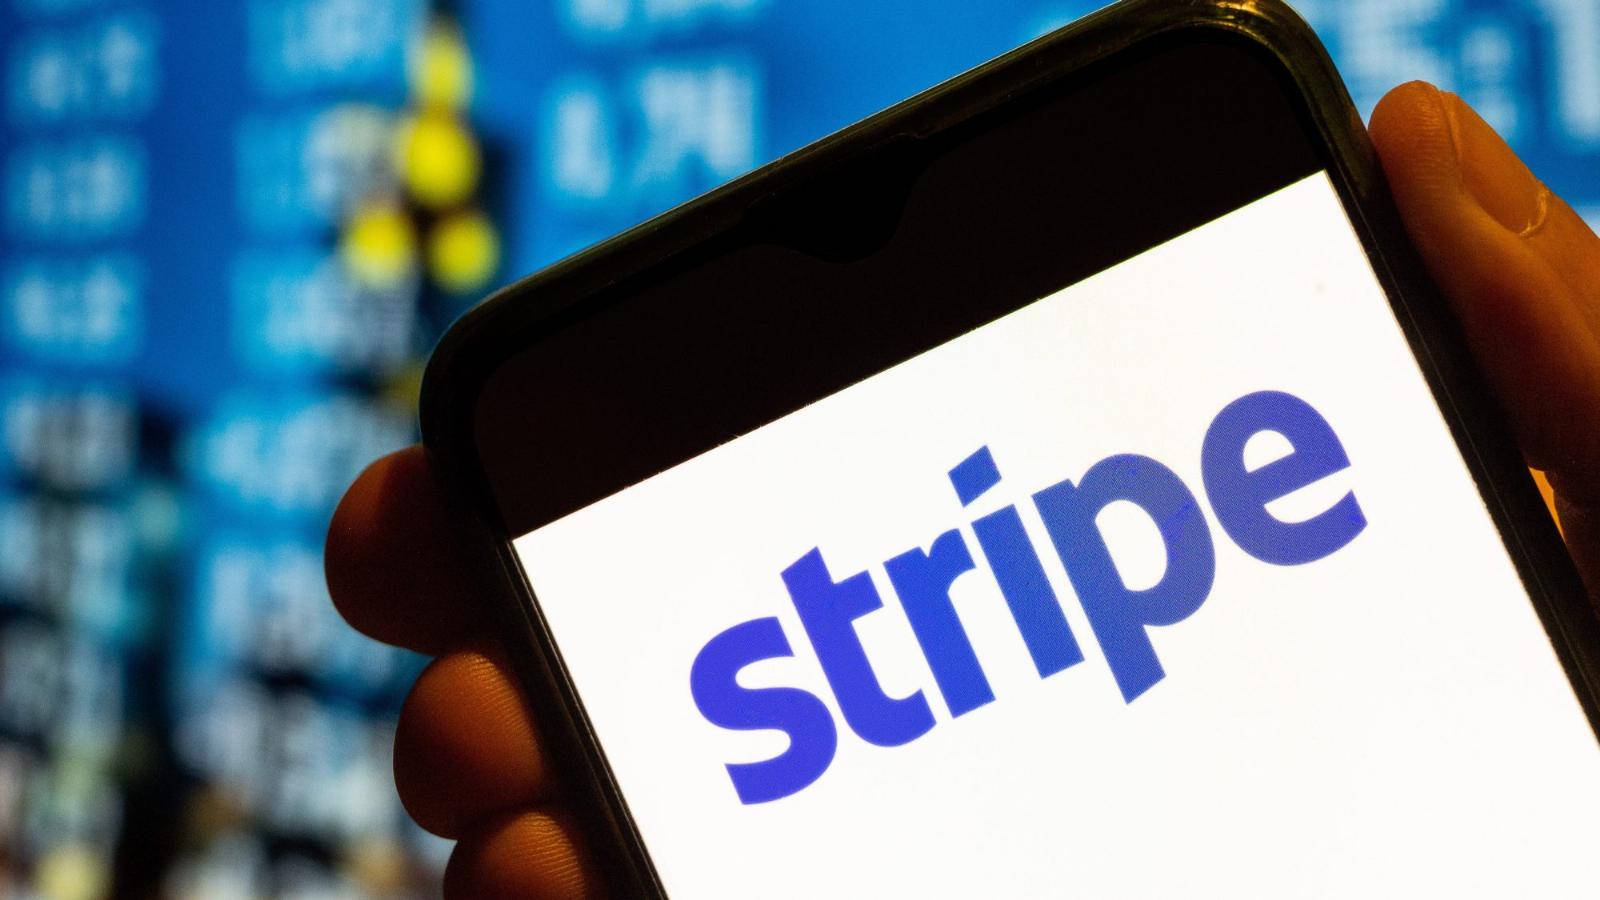 Stripe’s growth continues to impress as total payment volume tops $1T